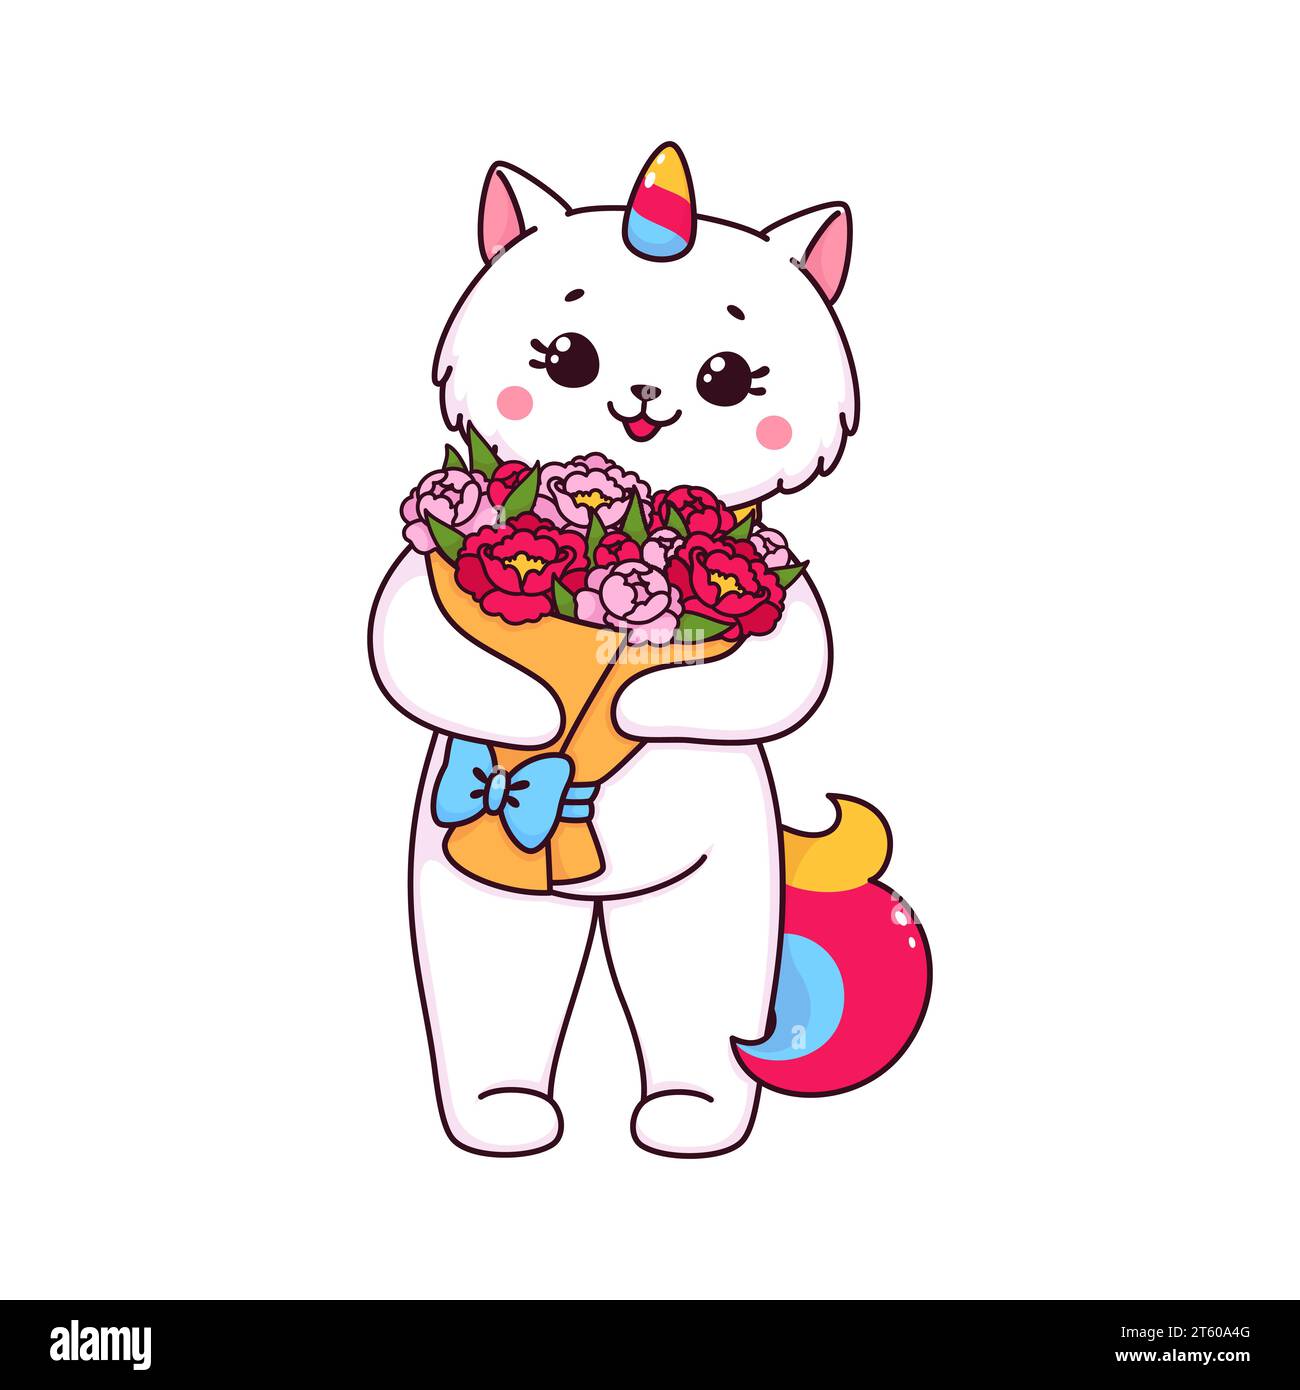 Cartoon cute caticorn cat or kitten character with flowers. White unicorn cat or caticorn kitty vector personage with happy face, rainbow horn and tail holding rose flowers bouquet with ribbon bow Stock Vector